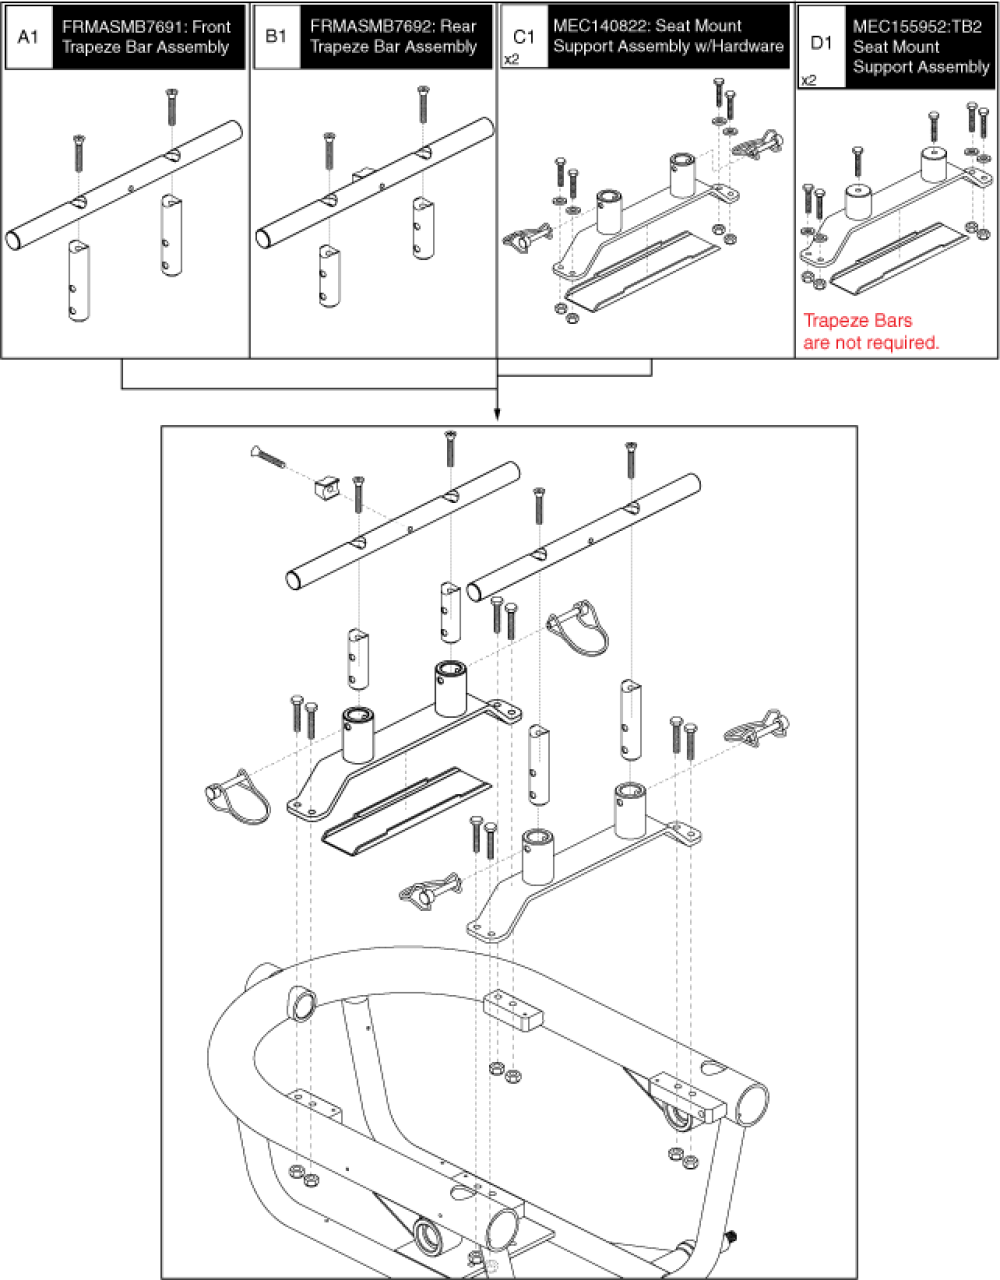 Trapeze Bars, Standard Seat Mounts, And Tb2 Seat Mounts parts diagram